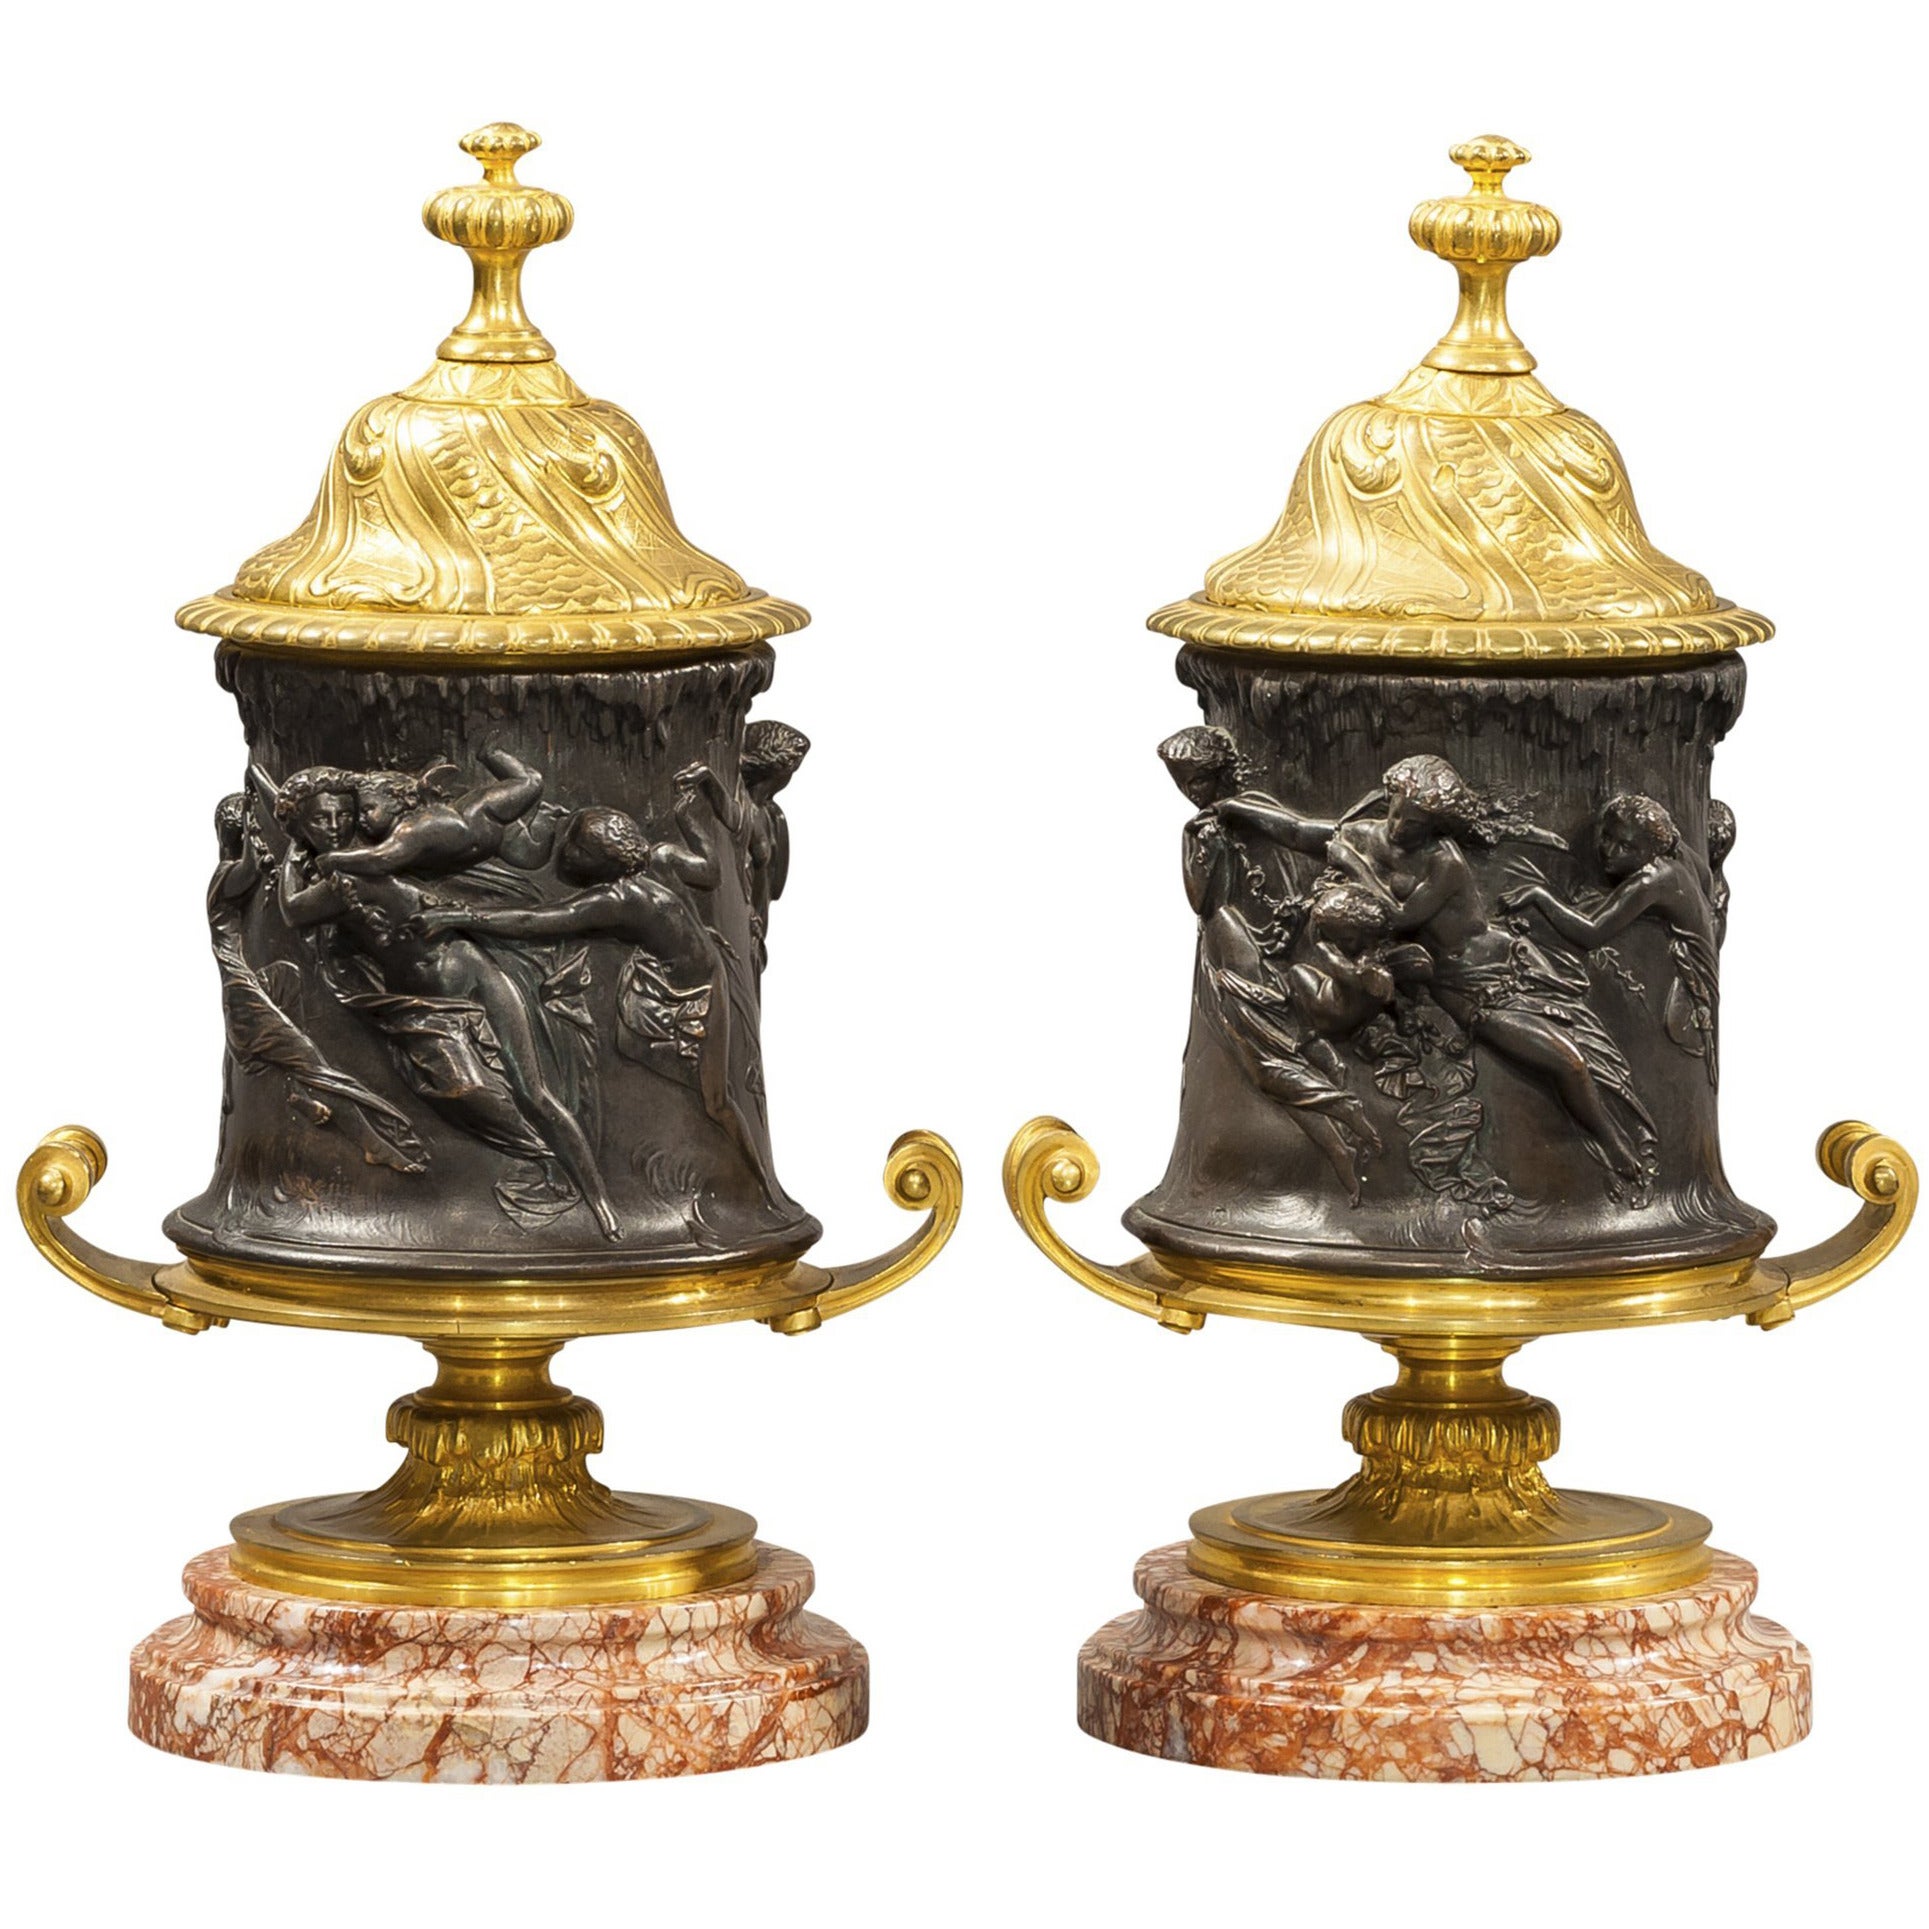 Signed Pair of Patinated and Gilt Bronze Figural Covered Urns